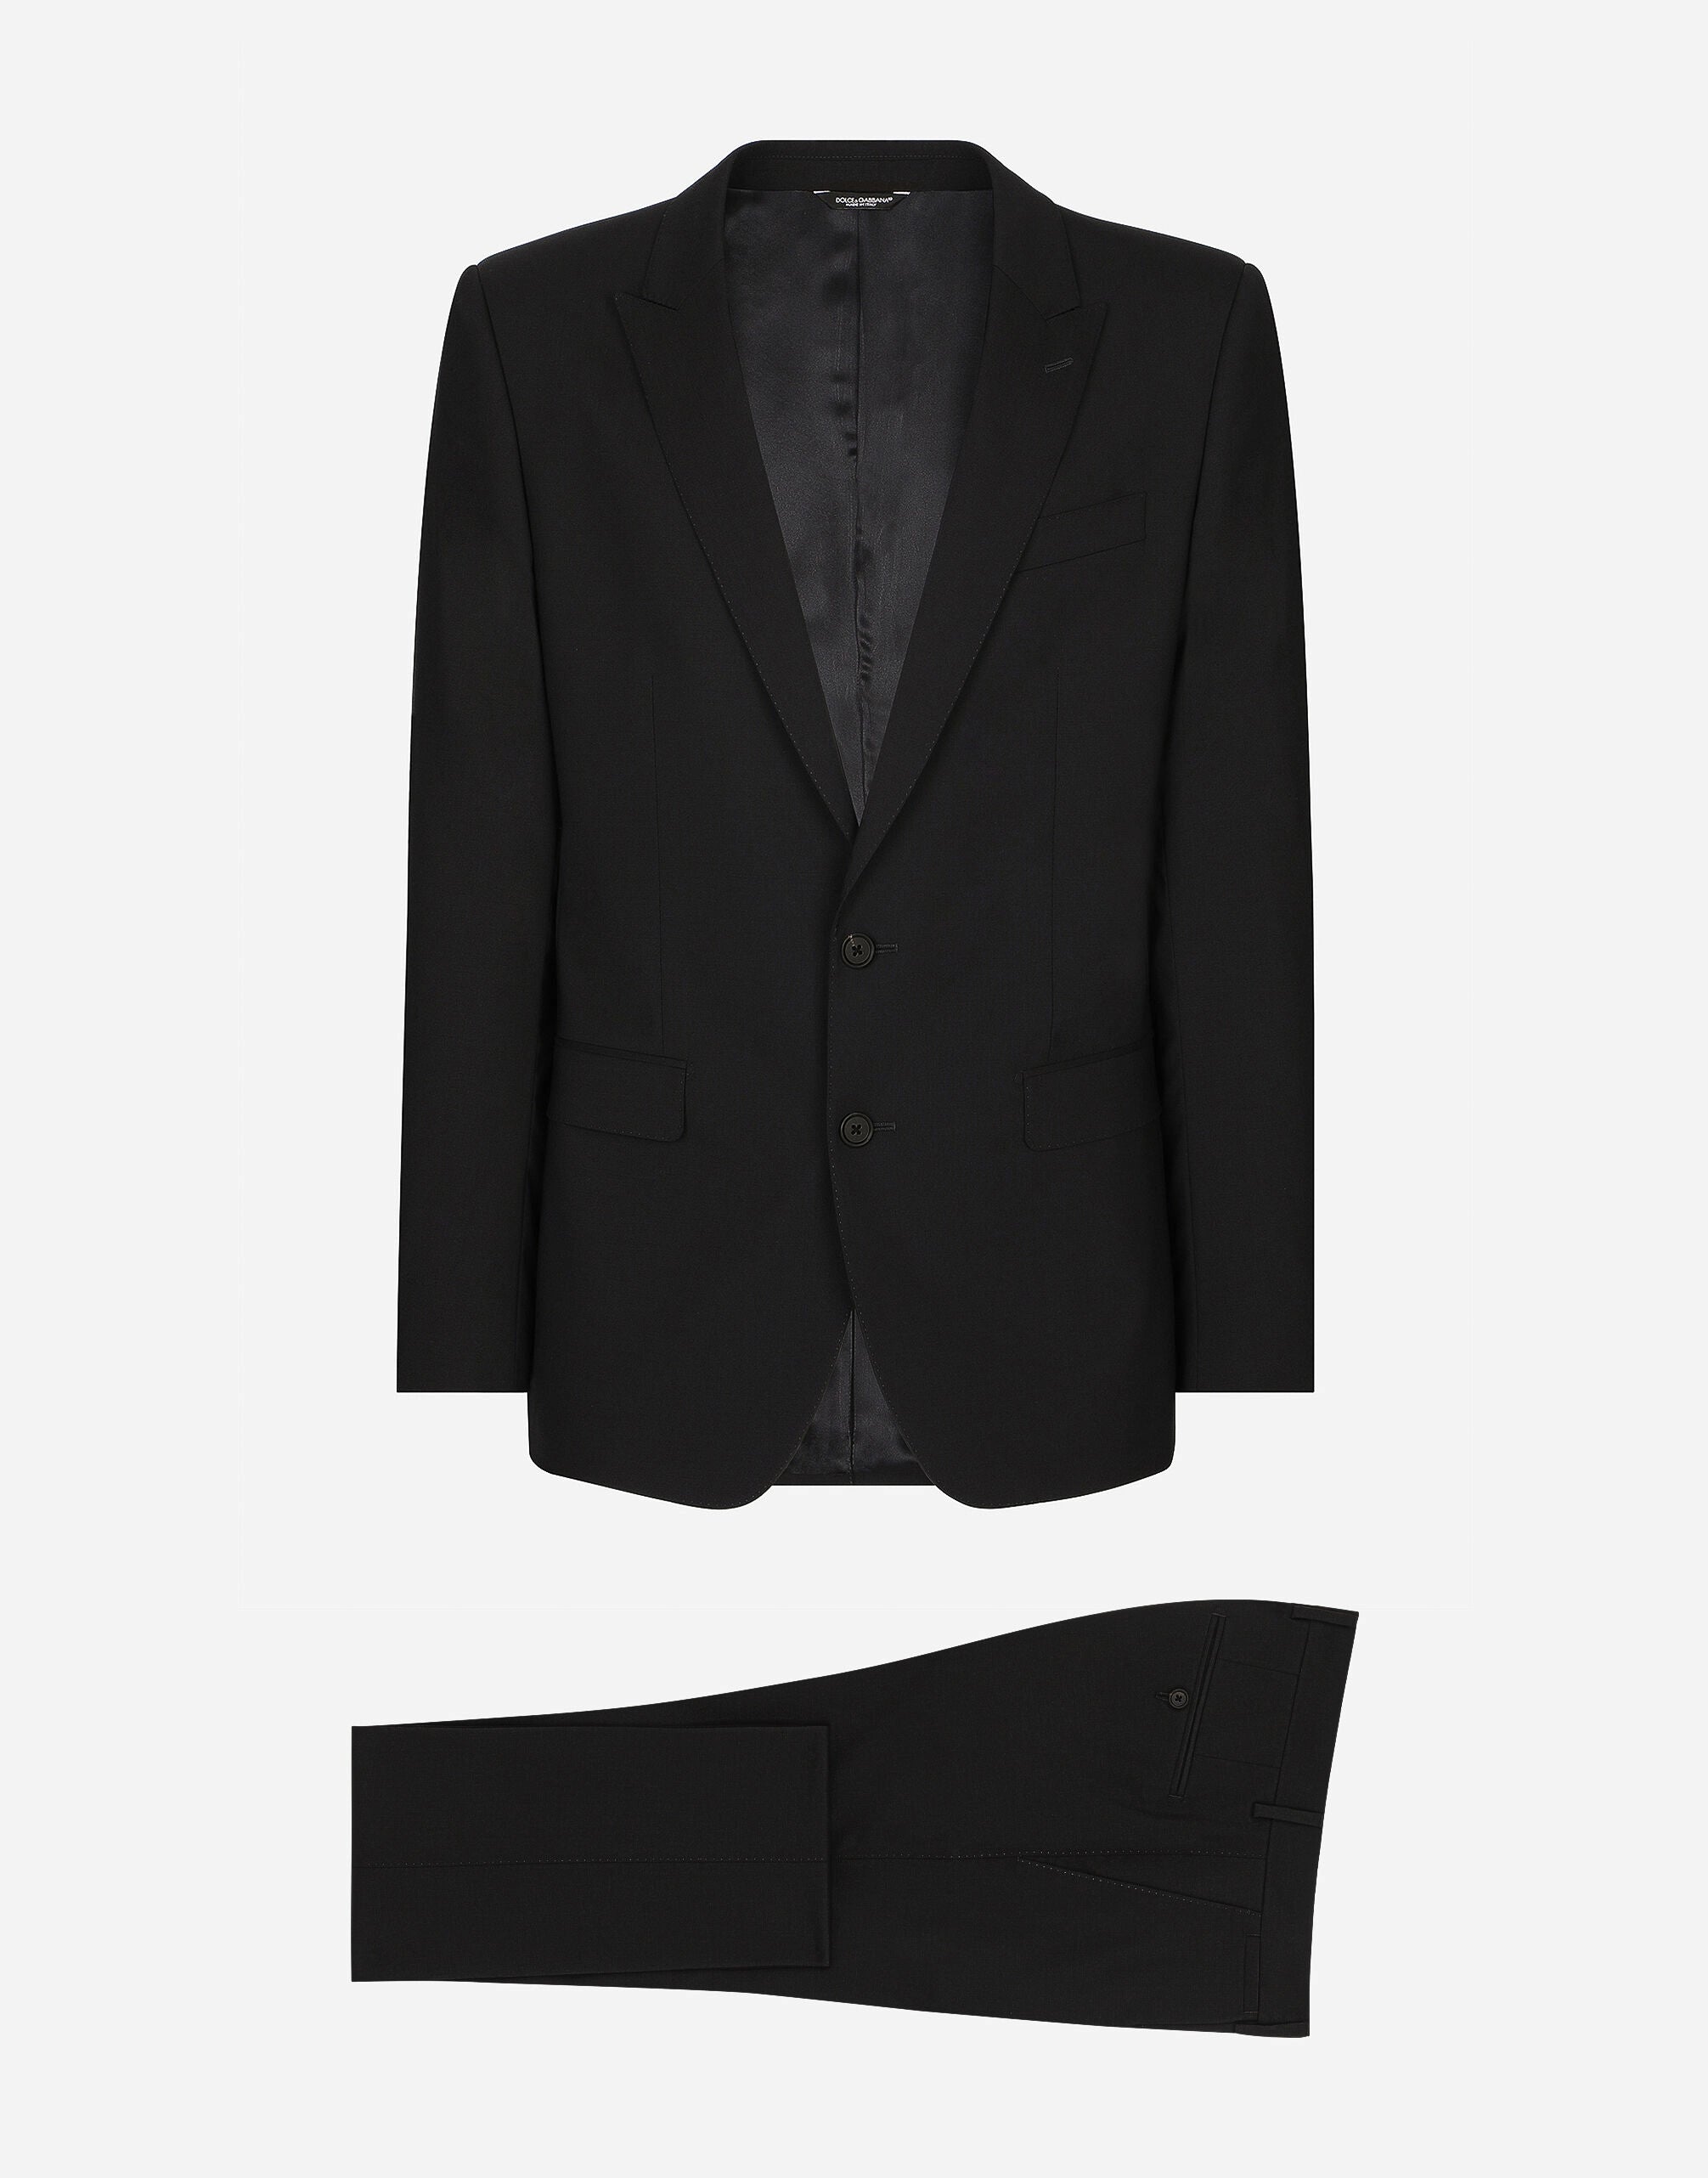 Dolce & Gabbana Martini-Fit Single-Breasted Wool Suit